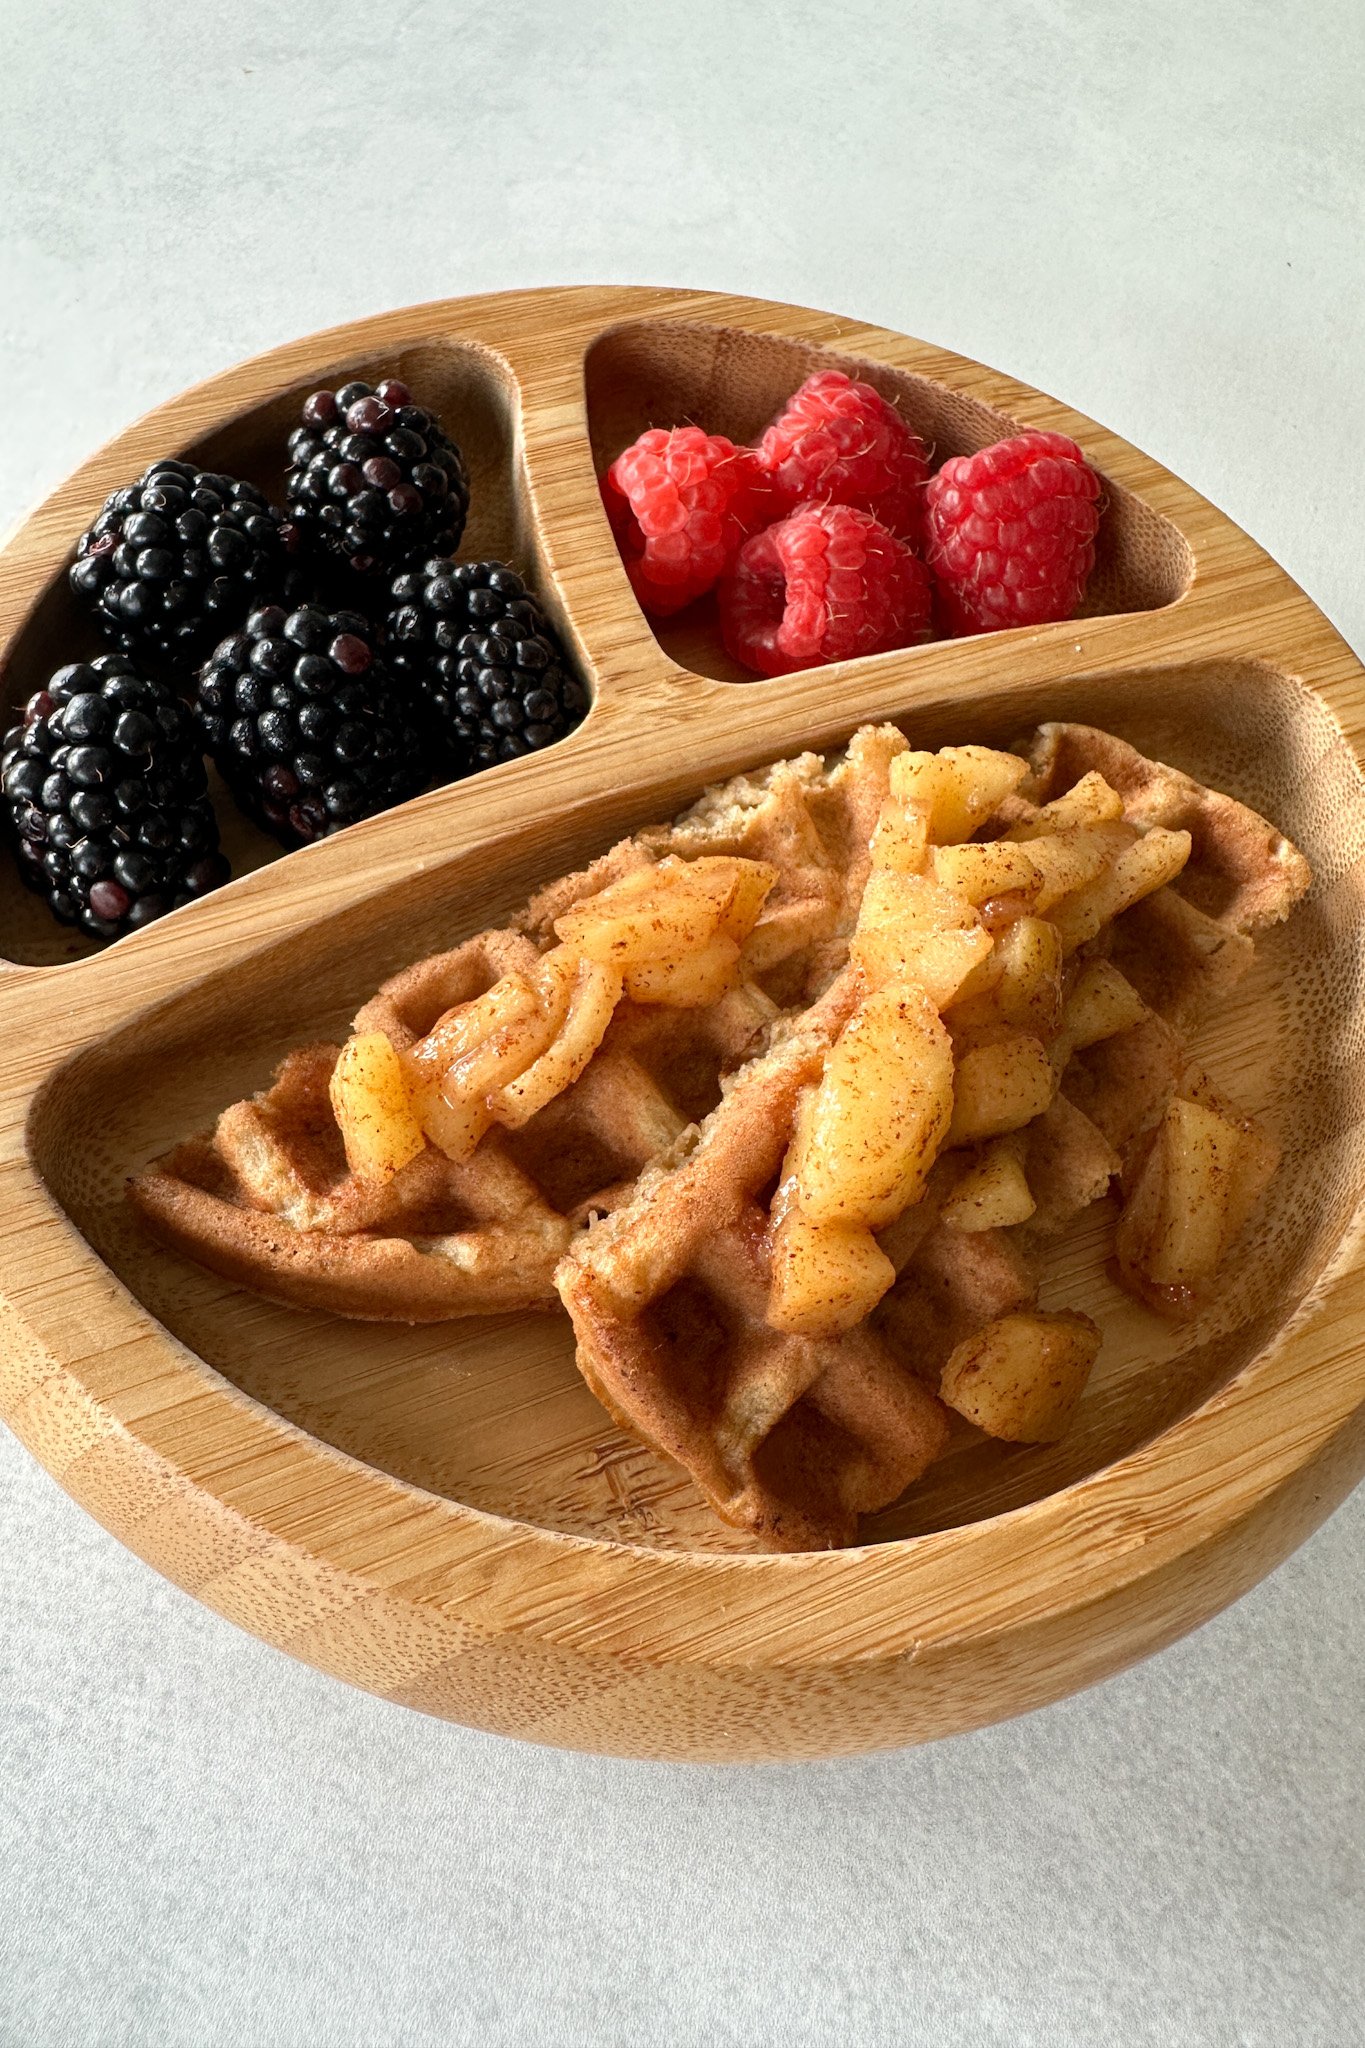 Cinnamon apple waffles topped with cinnamon apples.